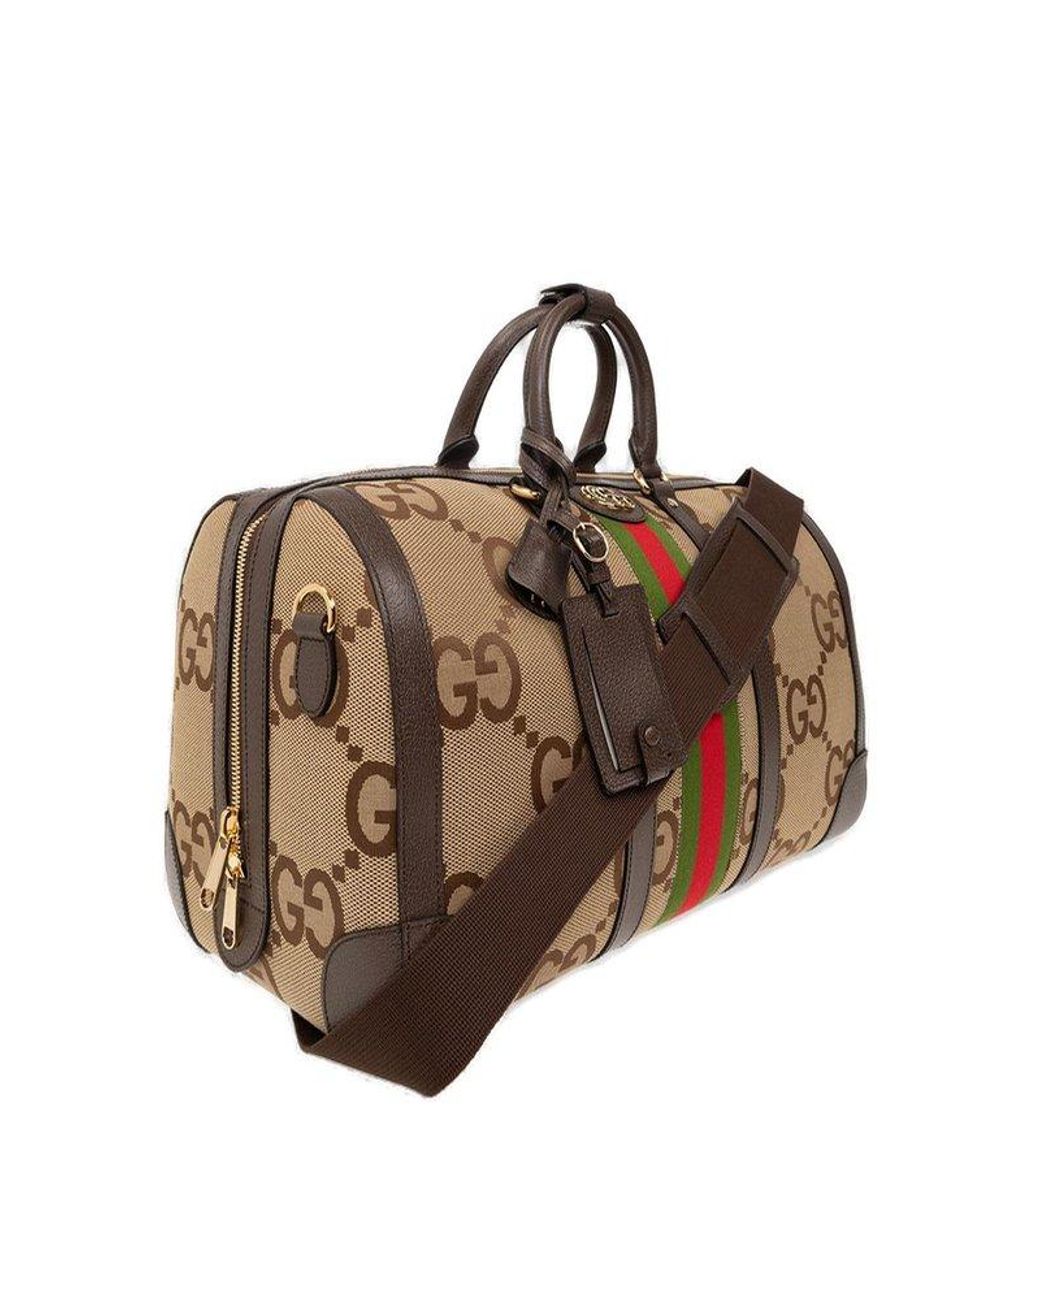 Gucci Savoy small duffle bag in red leather